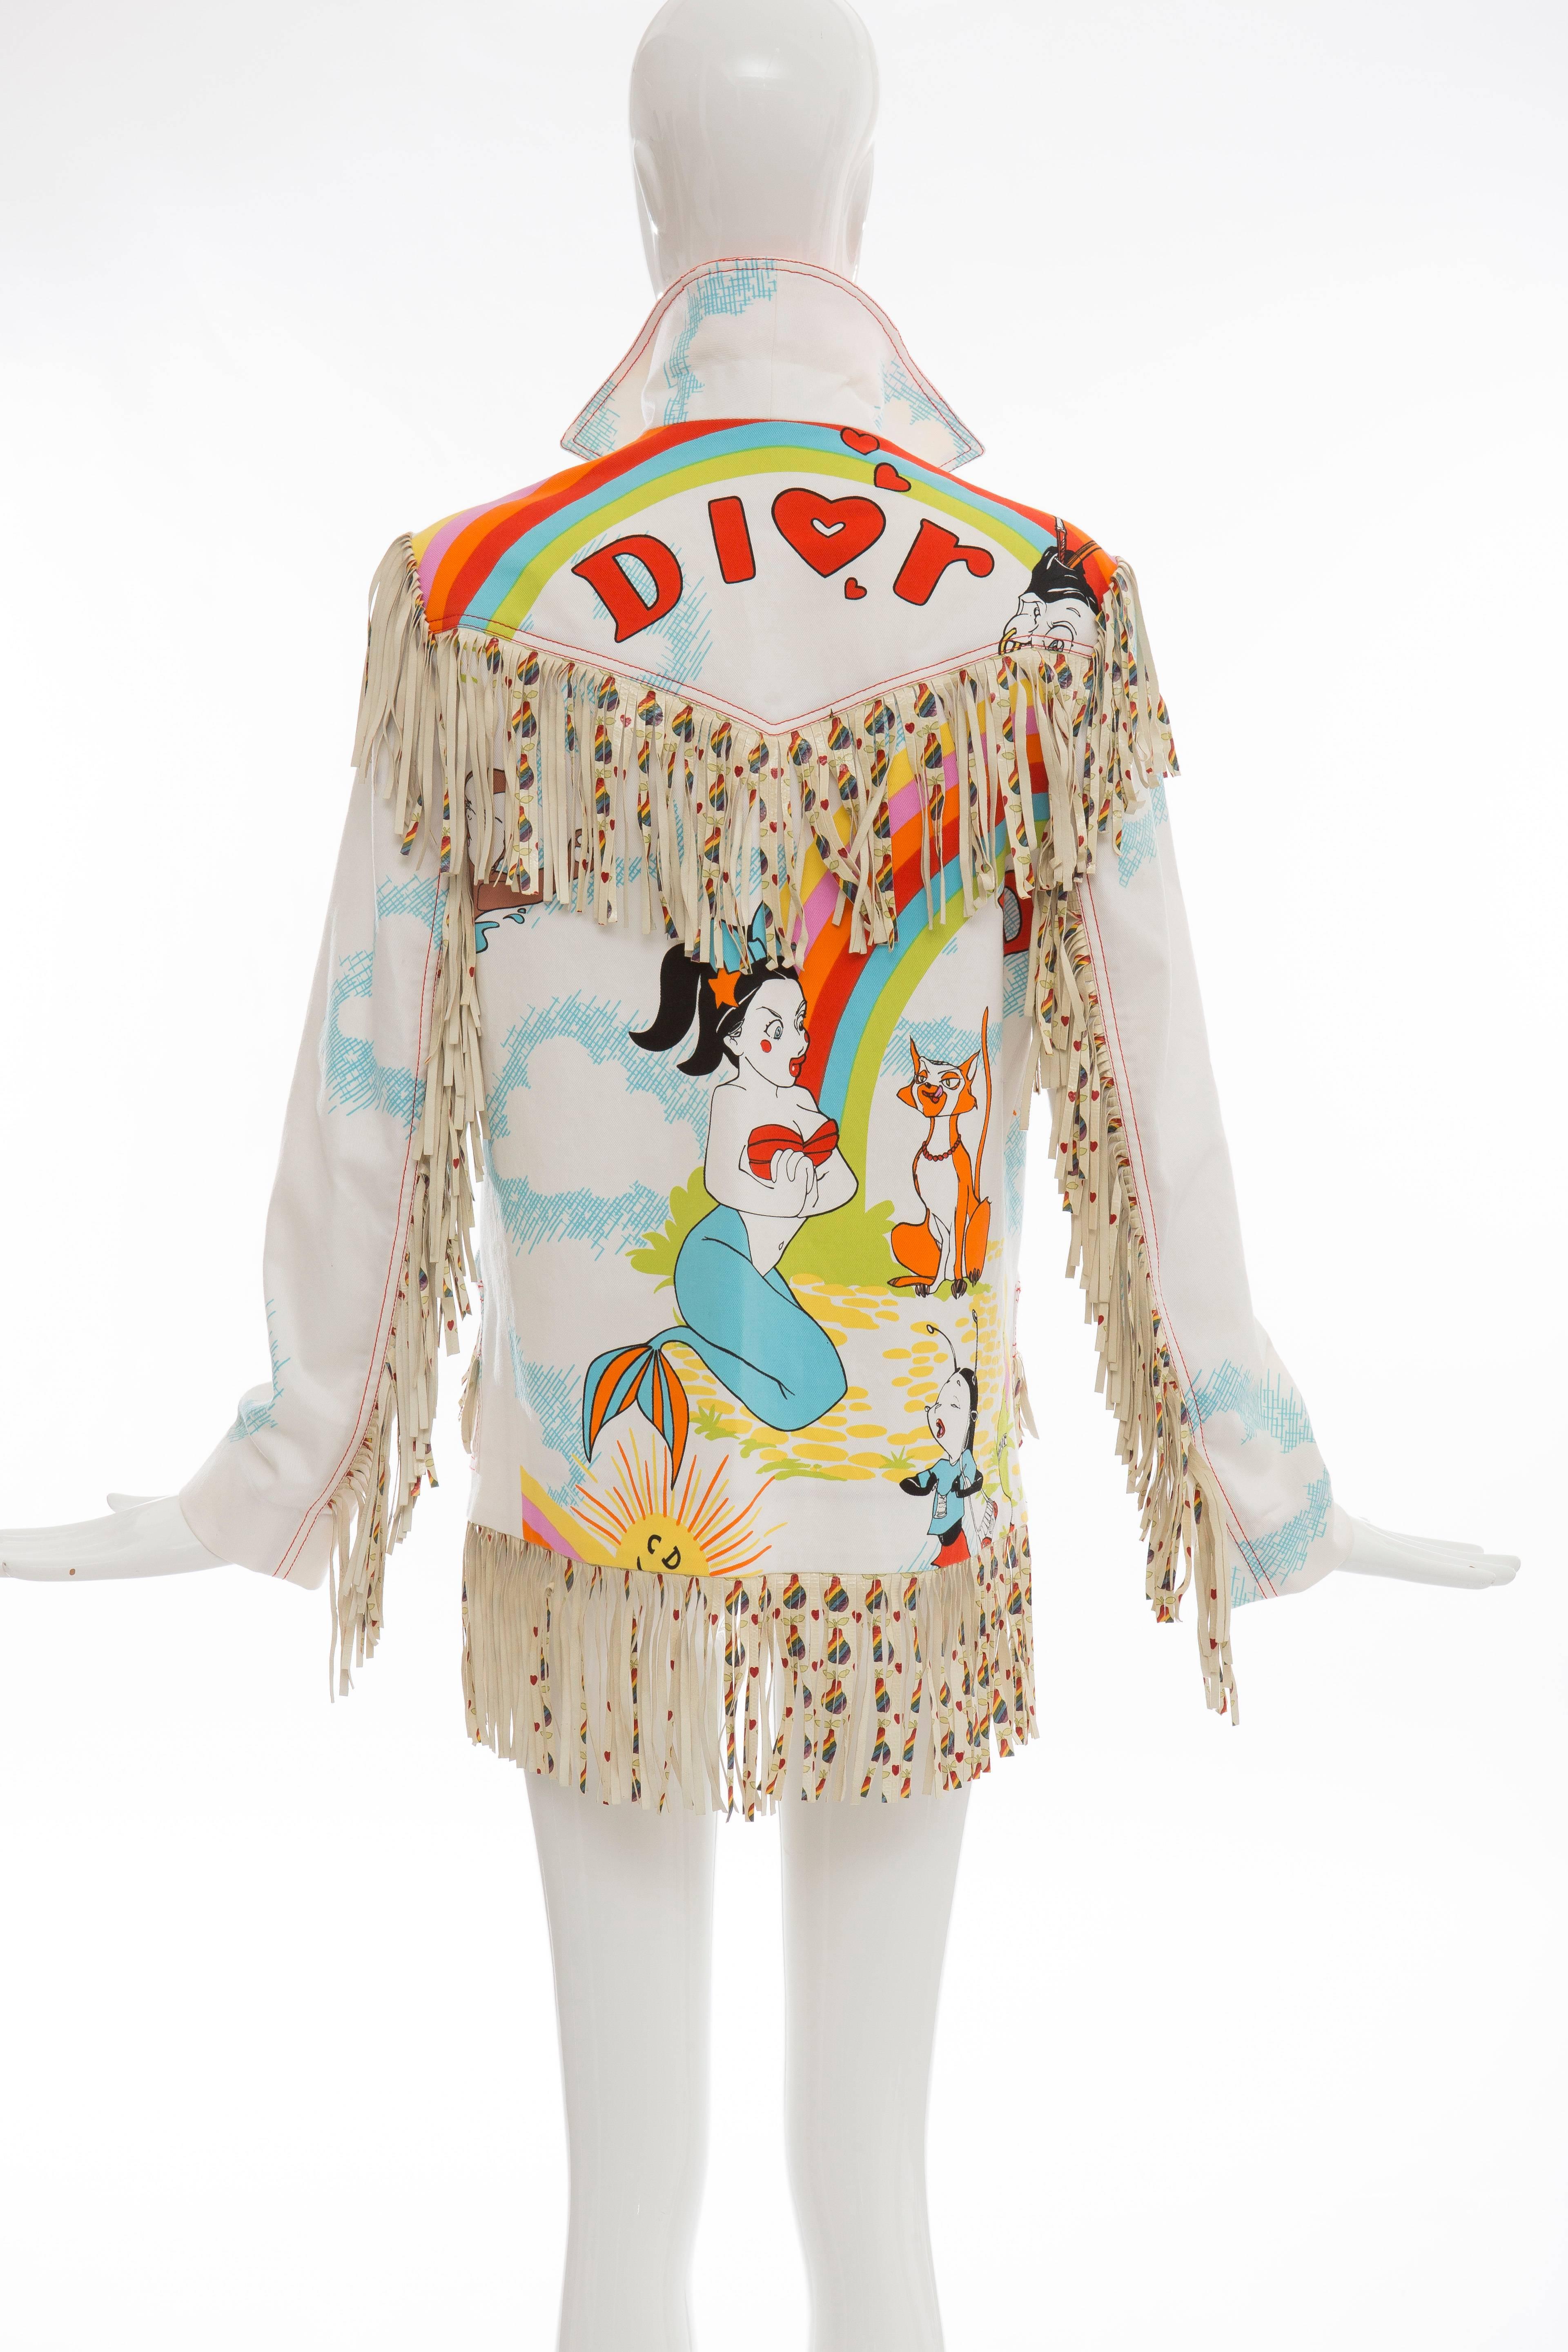 John Galliano for Christian Dior, Spring-Summer 2001, white cotton jacket with cartoon print throughout, leather fringe trim, dual patch pockets at waist, contrast stitching and button closures at center front.

IT. 42
US. 6

Bust 36, Waist 36,